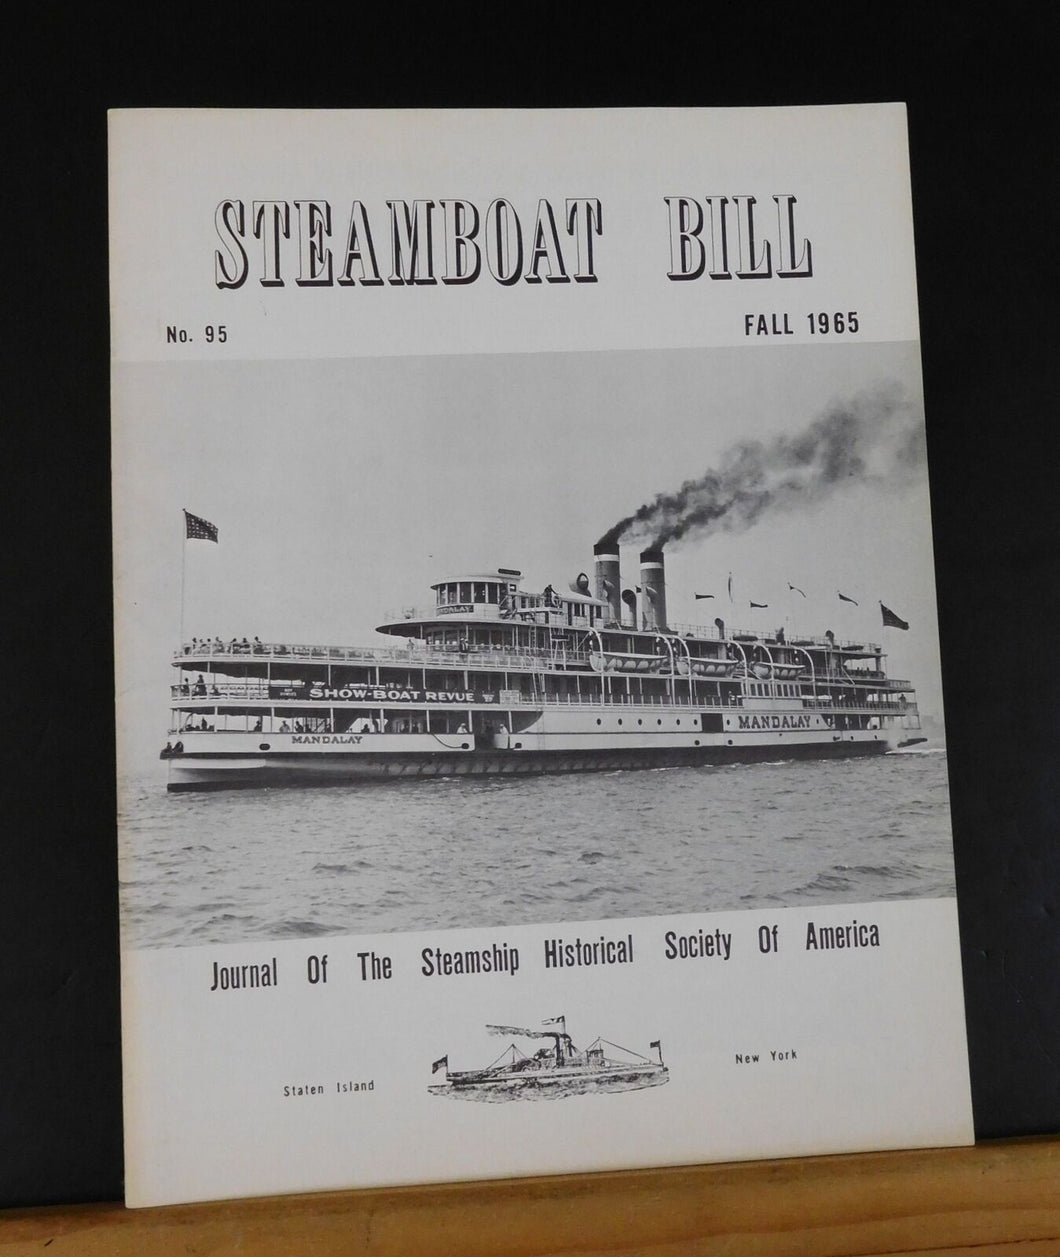 Steamboat Bill #95 Fall 1965 Journal of the Steamship Historical Society